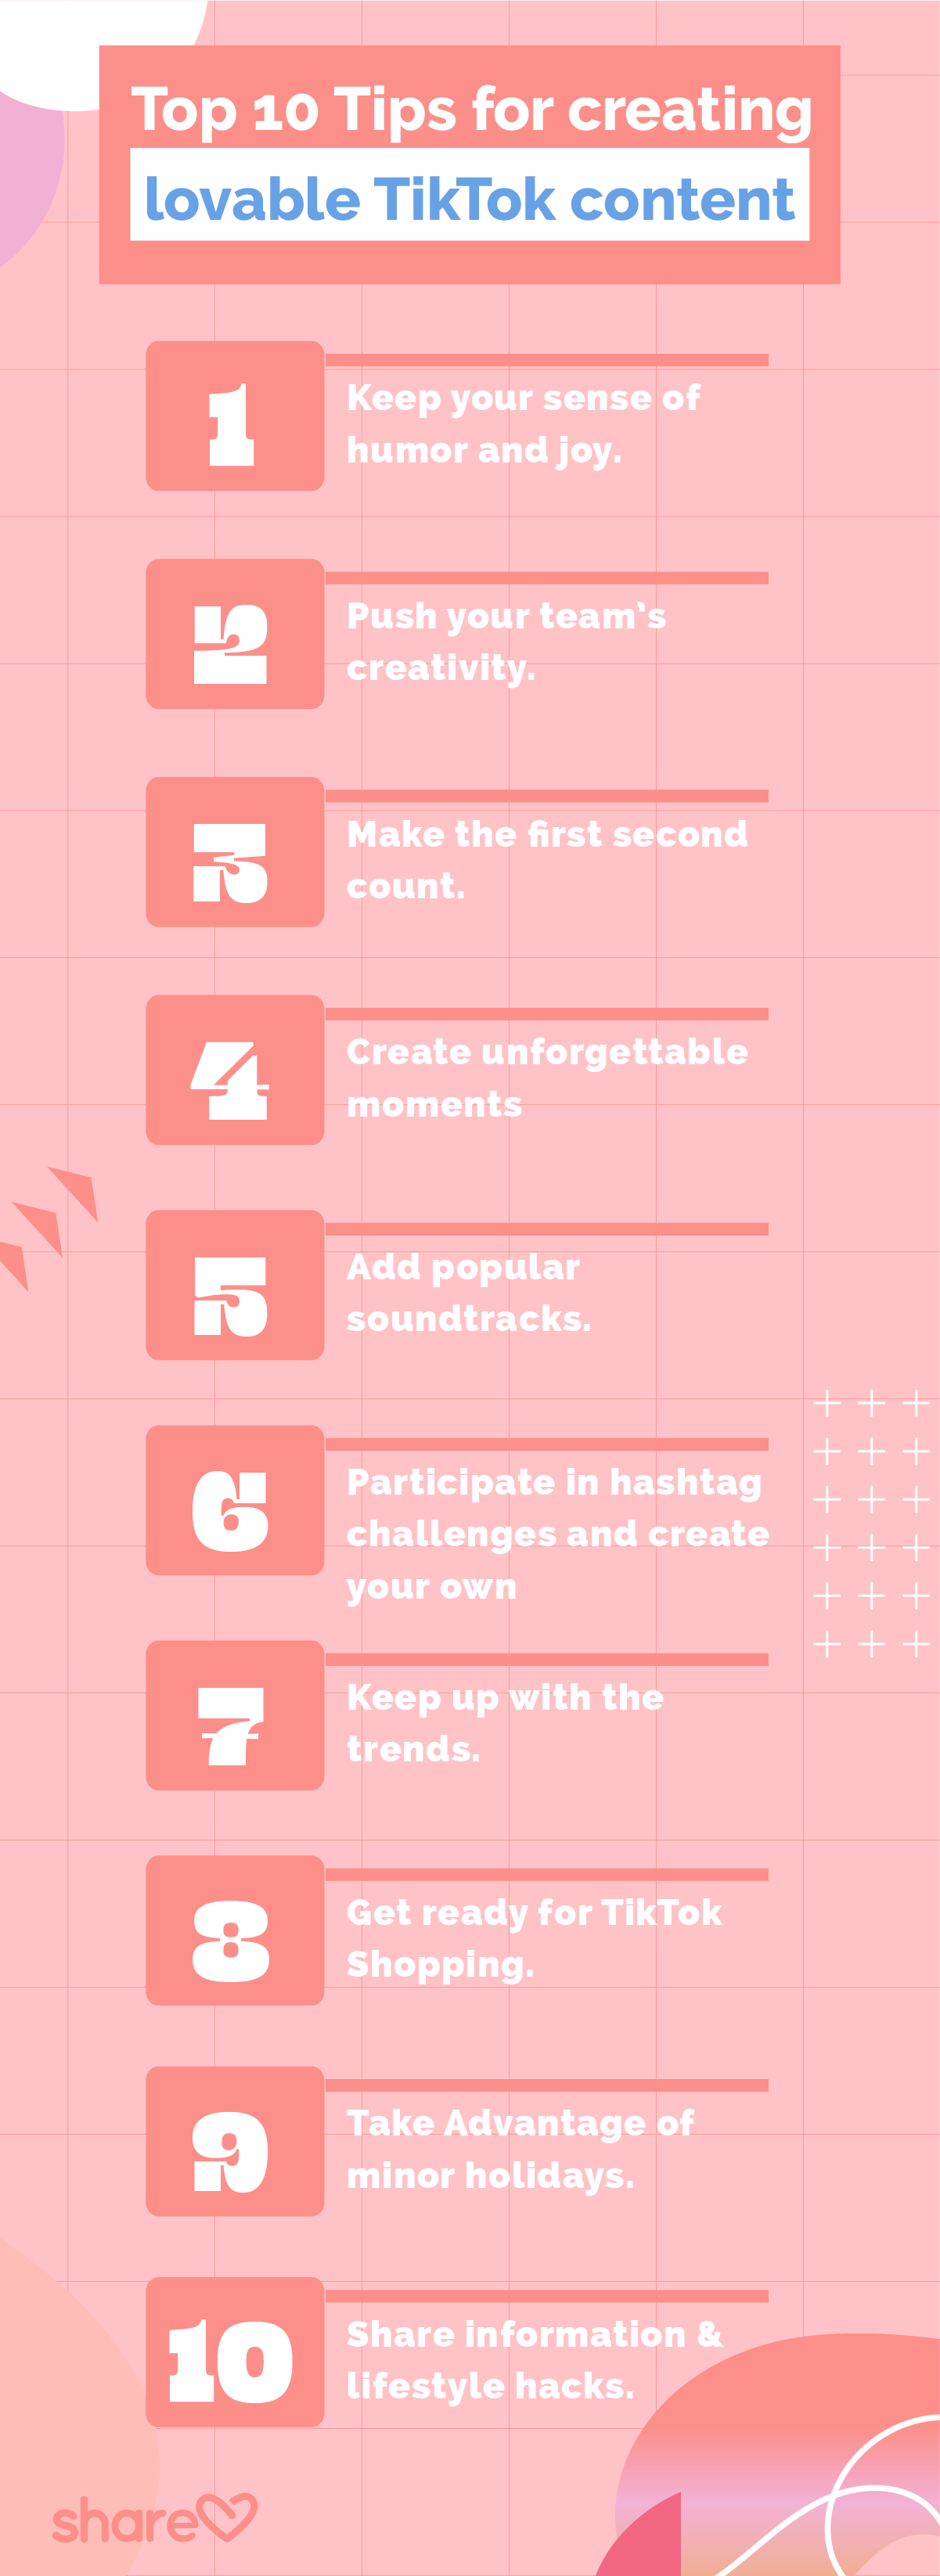 Tips for creating lovable TikTok content